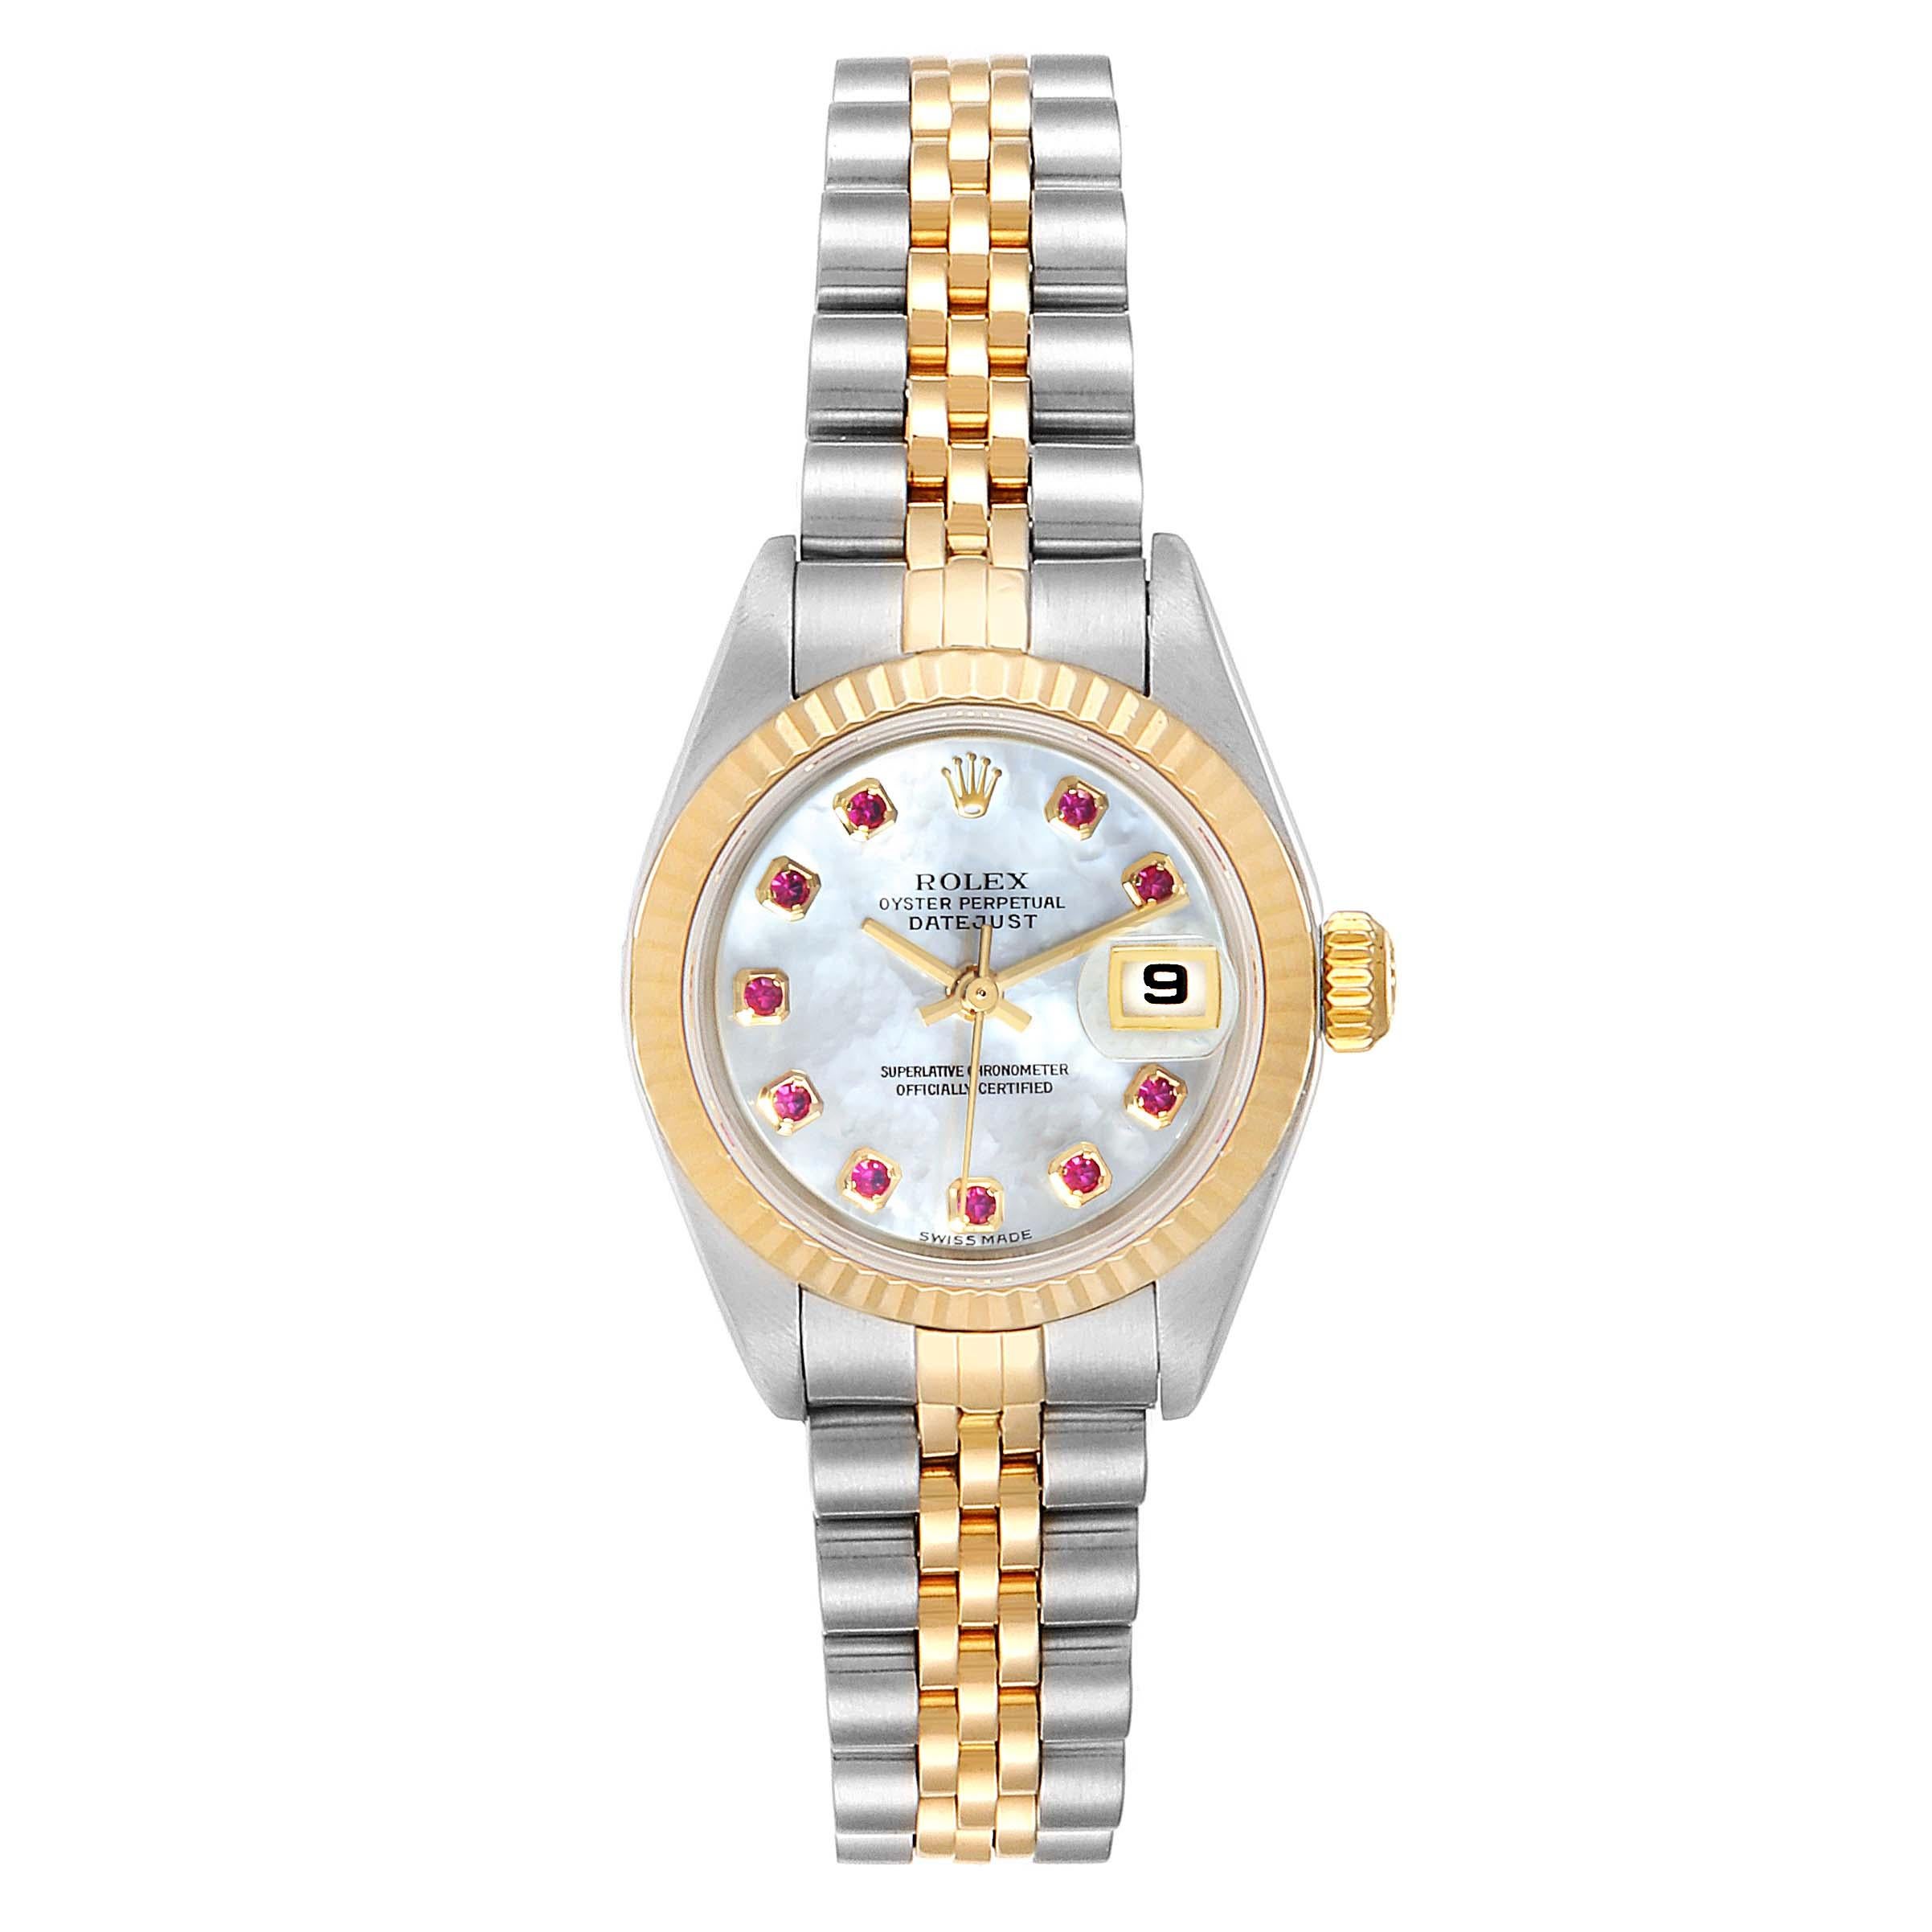 Rolex Datejust Steel Yellow Gold MOP Ruby Ladies Watch 79173 Box Papers. Officially certified chronometer self-winding movement. Stainless steel oyster case 26.0 mm in diameter. Rolex logo on a crown. 18k yellow gold fluted bezel. Scratch resistant